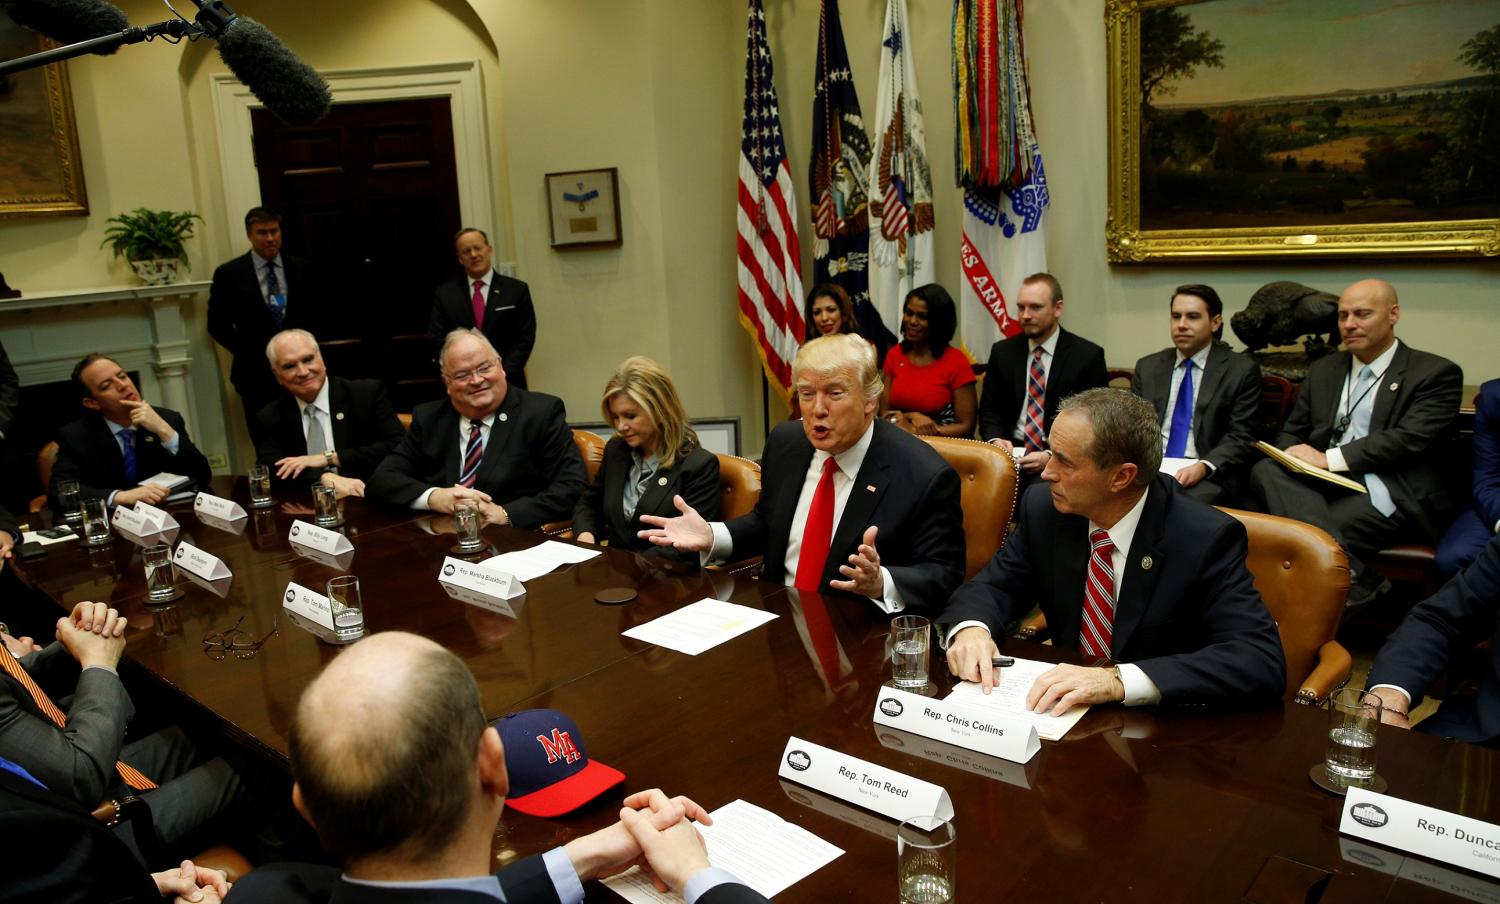 U.S. President Donald Trump holds a meeting with House Republicans at the White House in Washington, U.S. February 16, 2017. REUTERS/Kevin Lamarque - RTSYZT7